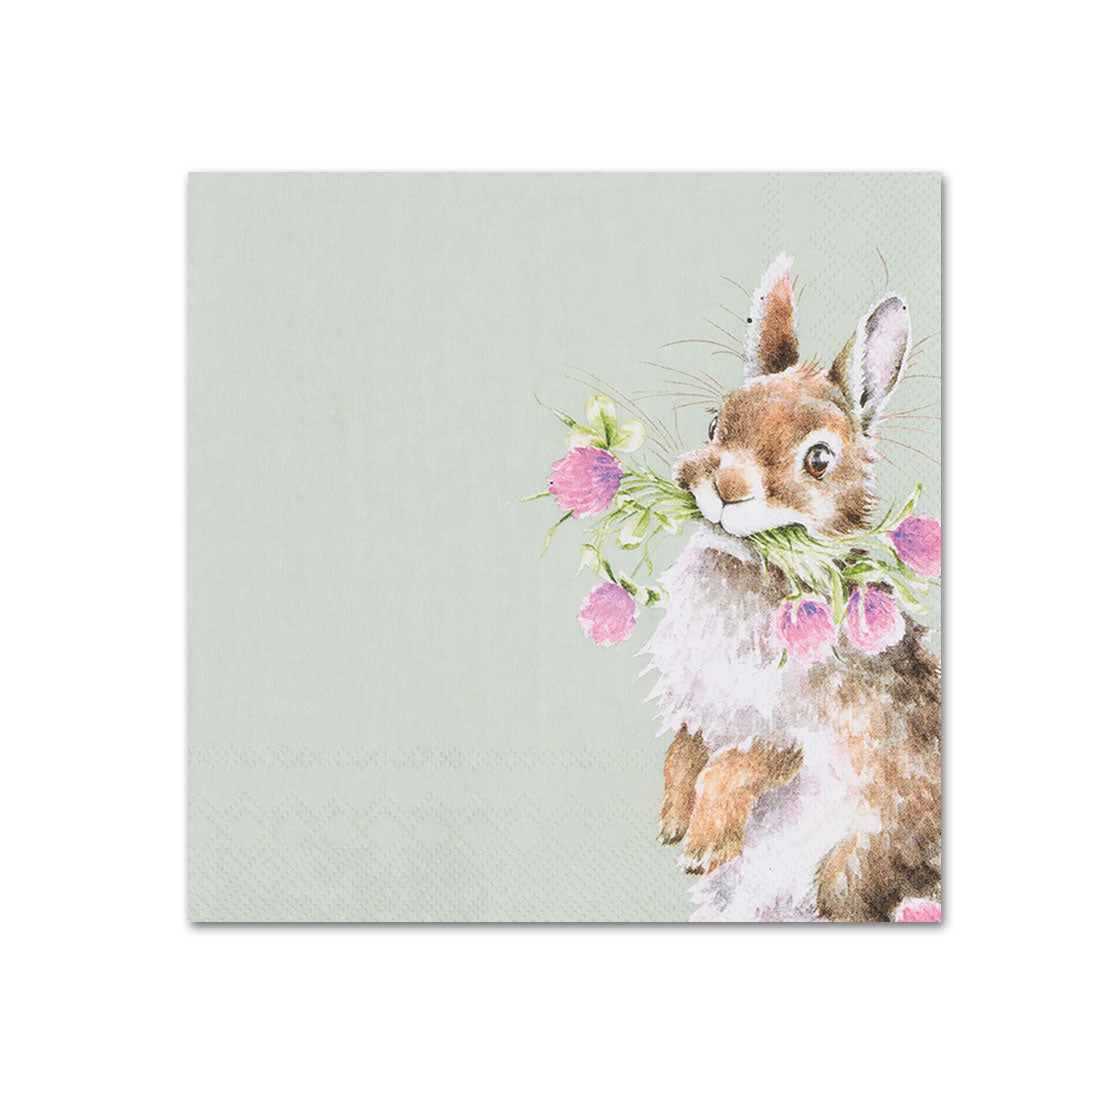 Heads Over Clover Rabbit Beverage Napkins by Wrendale